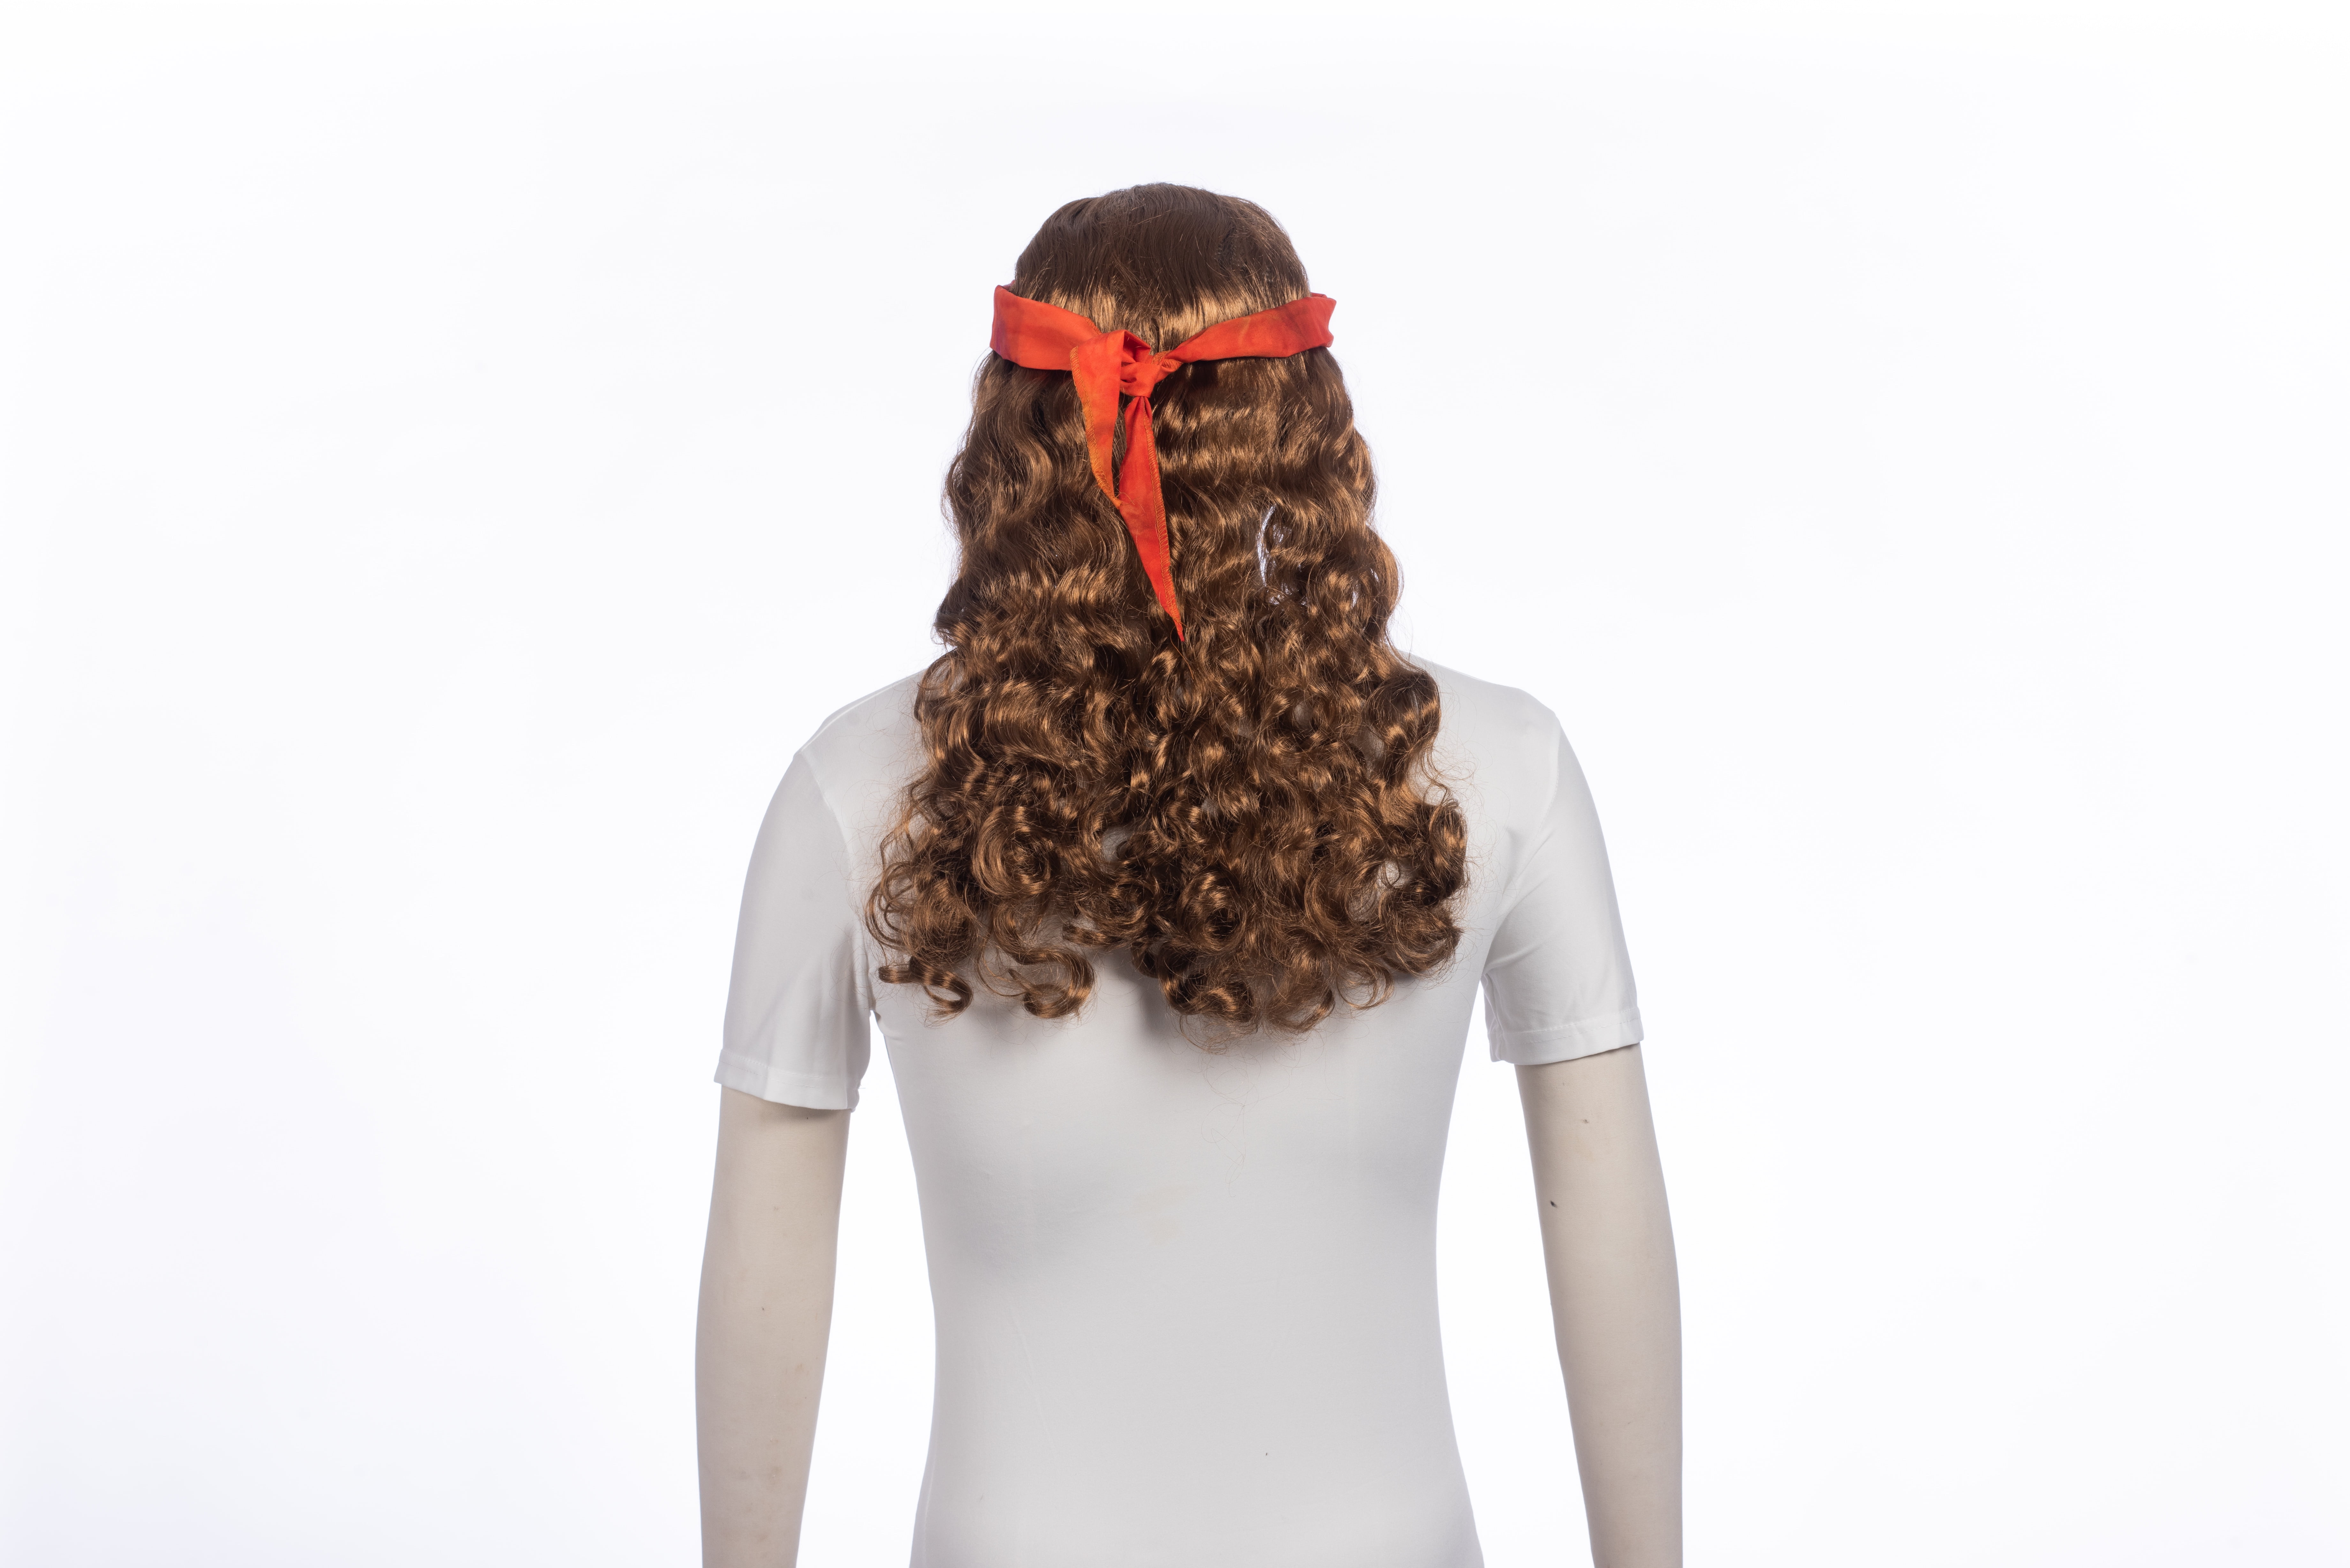 Halloween Men's and Women's Unisex Hippie Costume Wig with Bandana, By Way  to Celebrate 